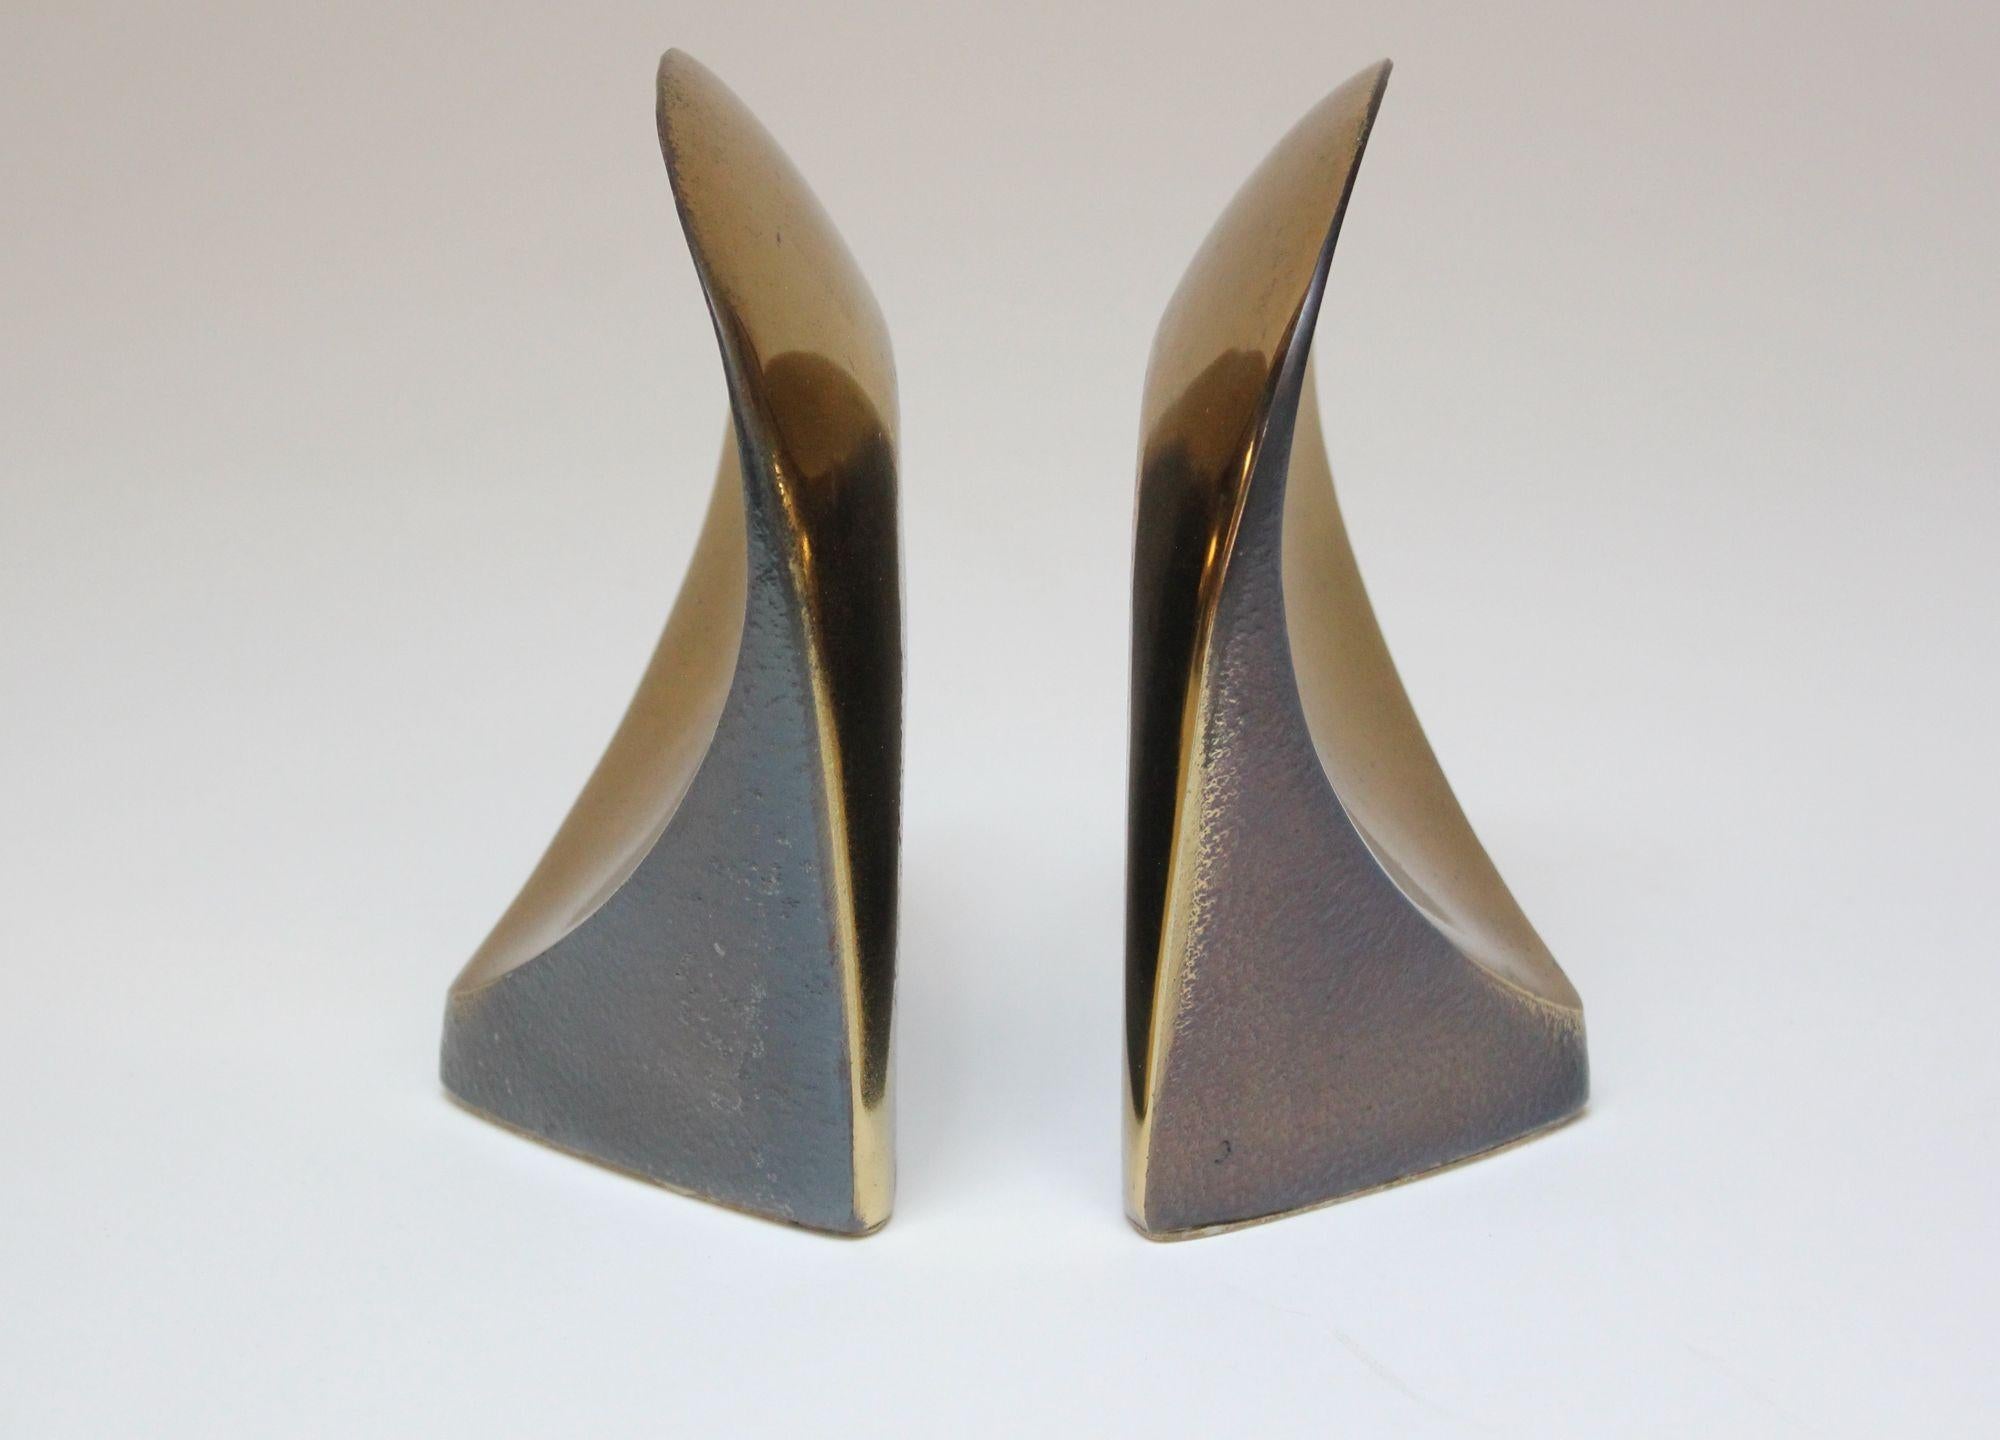 Pair of sculptural brass bookends Designed by Ben Seibel for Jenfredware.
Unique, scarcely seen examples incorporating a two-tone, textured design (there are blackened areas which are mottled, providing a dense texture and color contrast to an